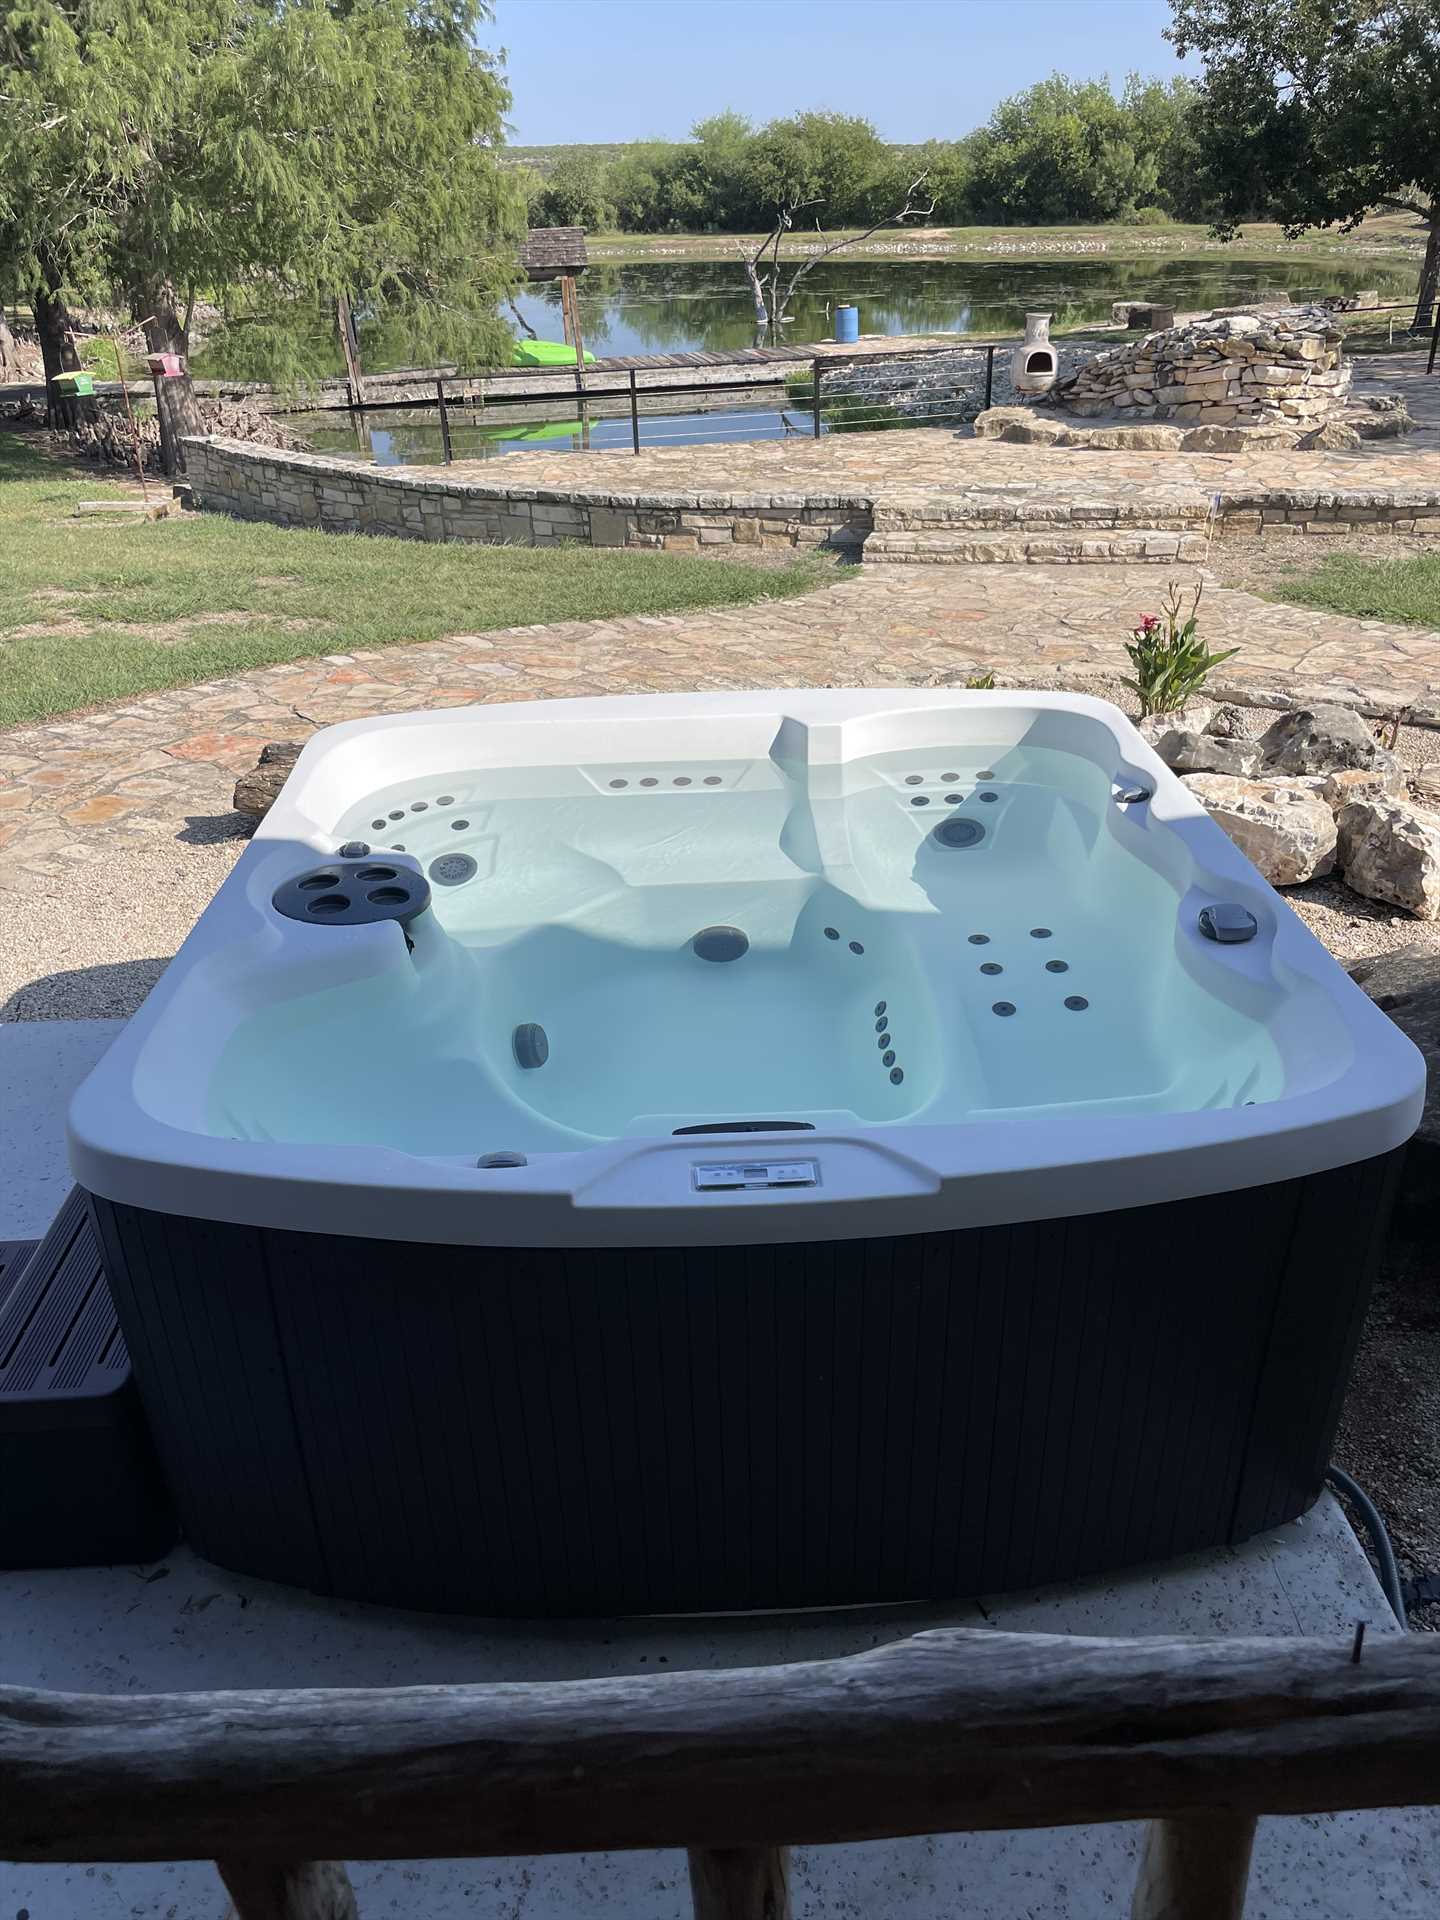                                                 Enjoy the hot tub suitable for 6 persons!